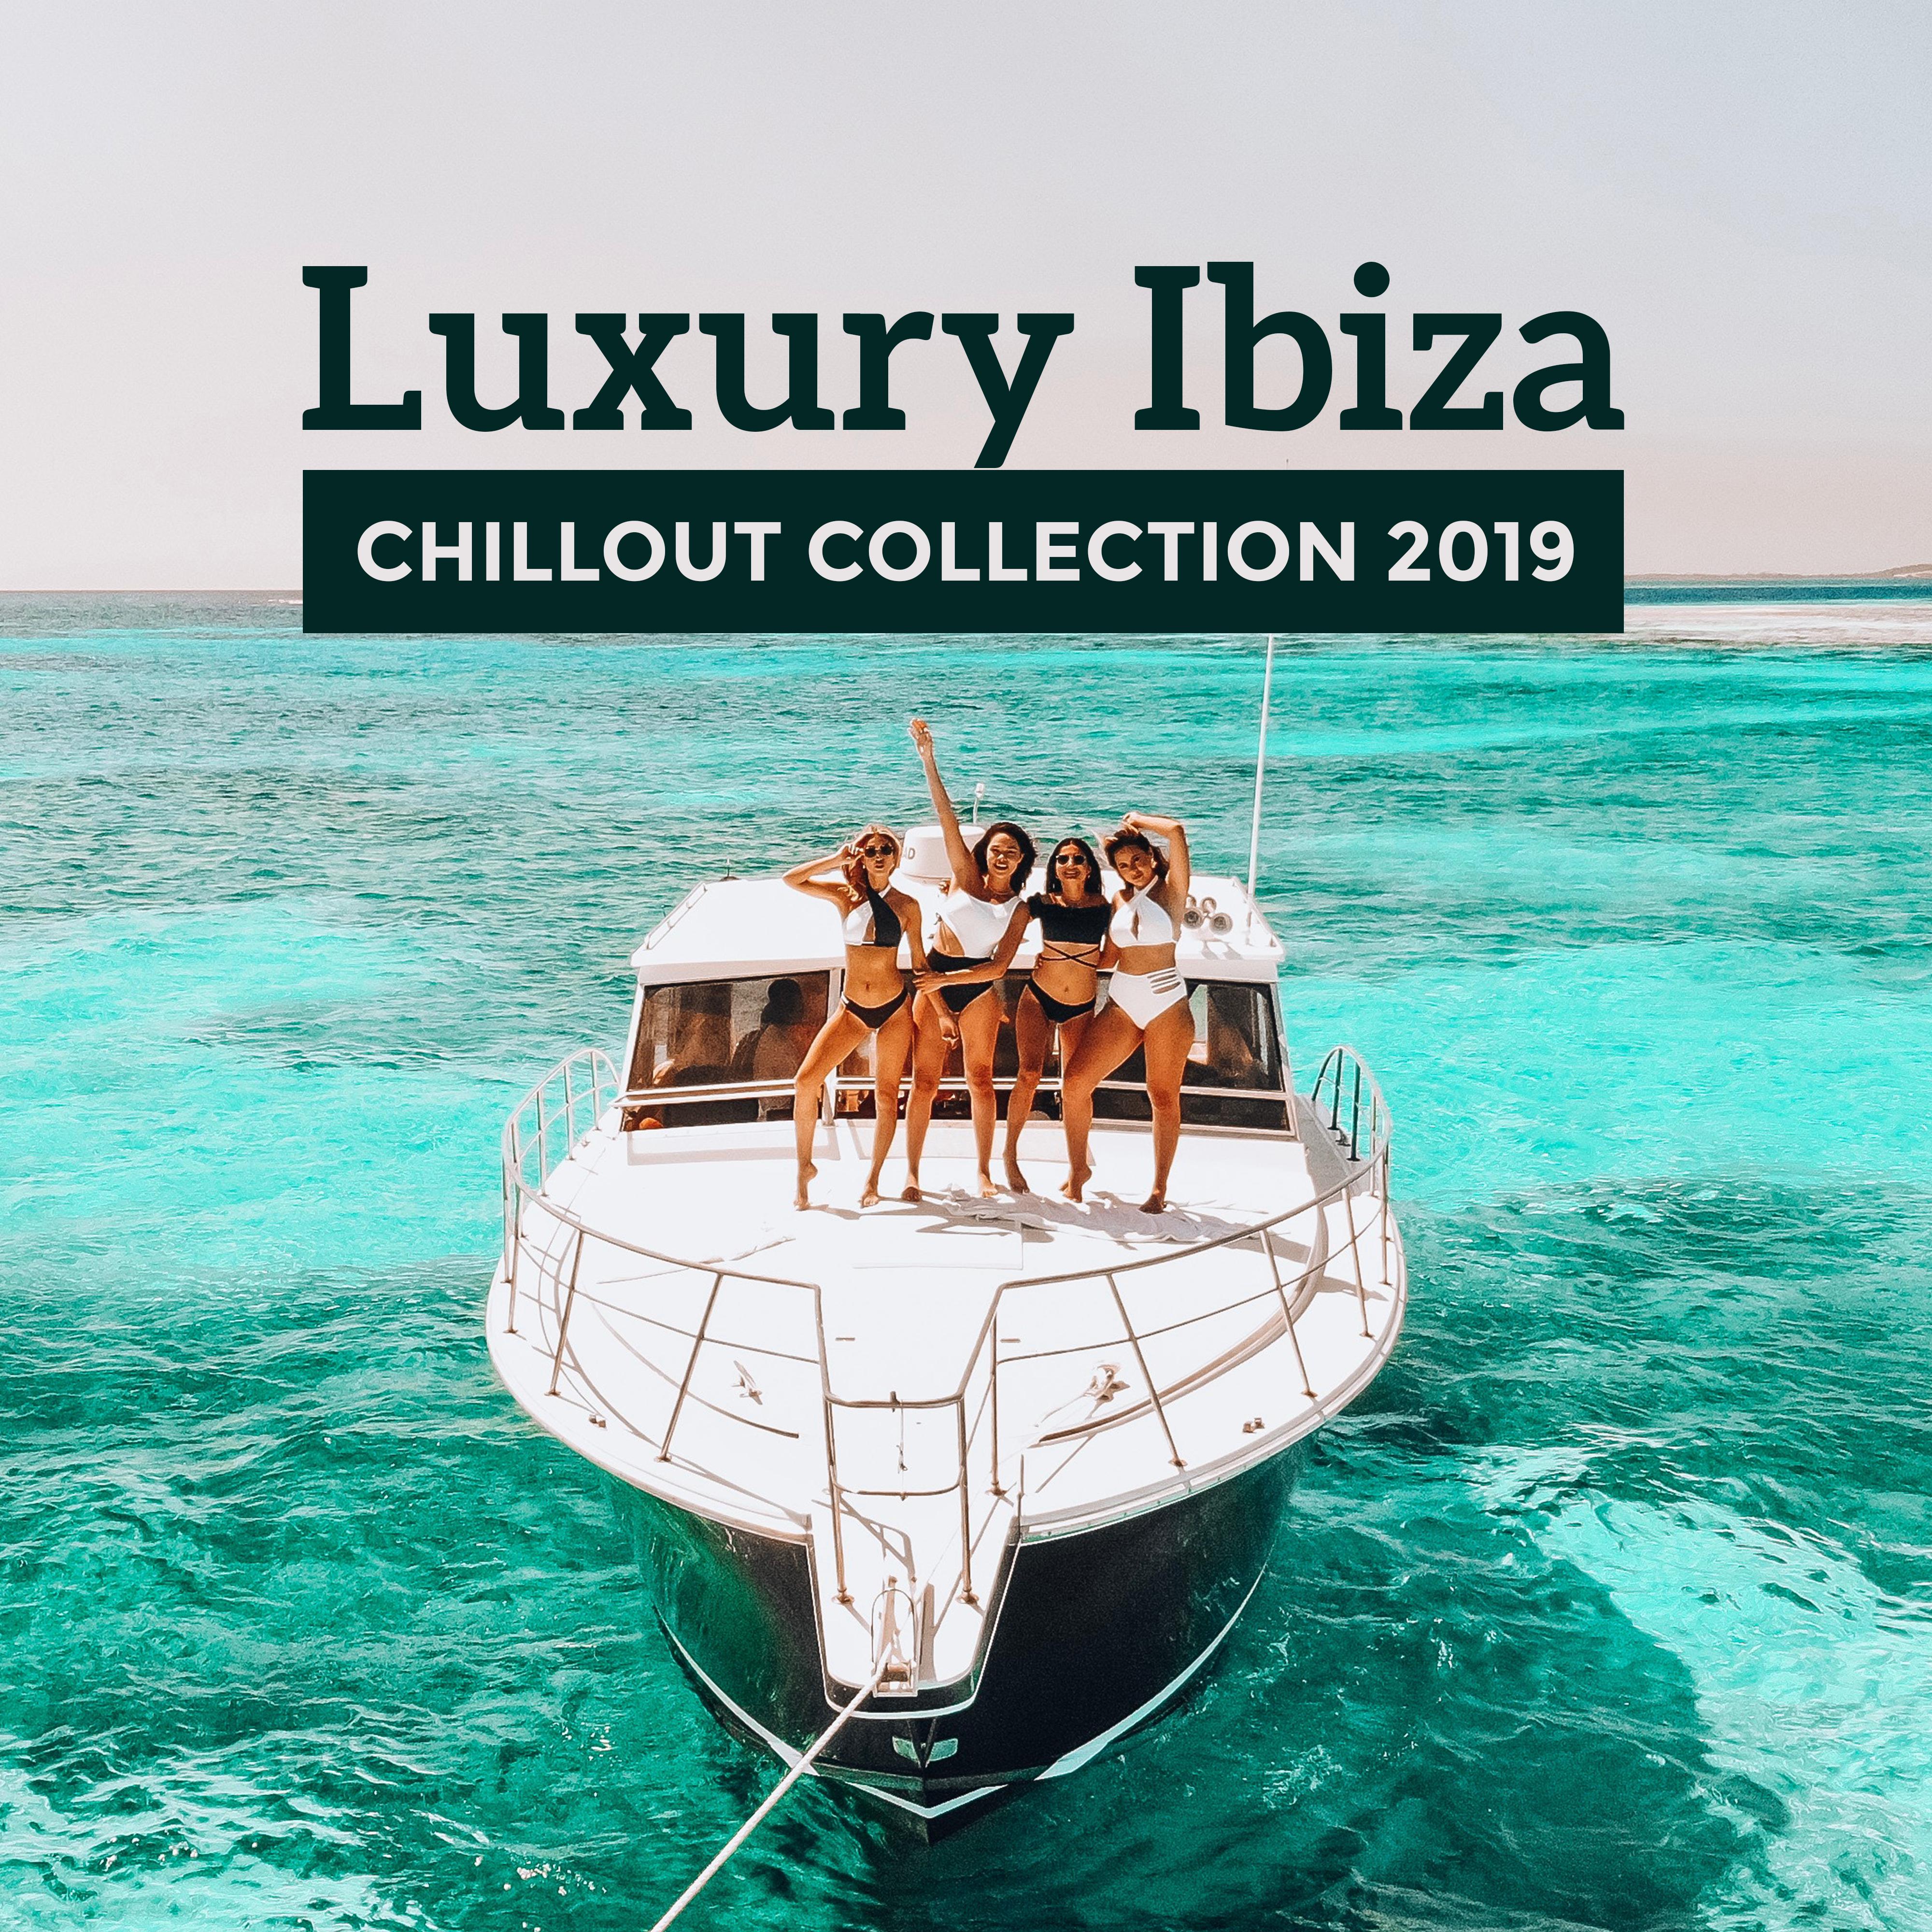 Luxury Ibiza Chillout Collection 2019